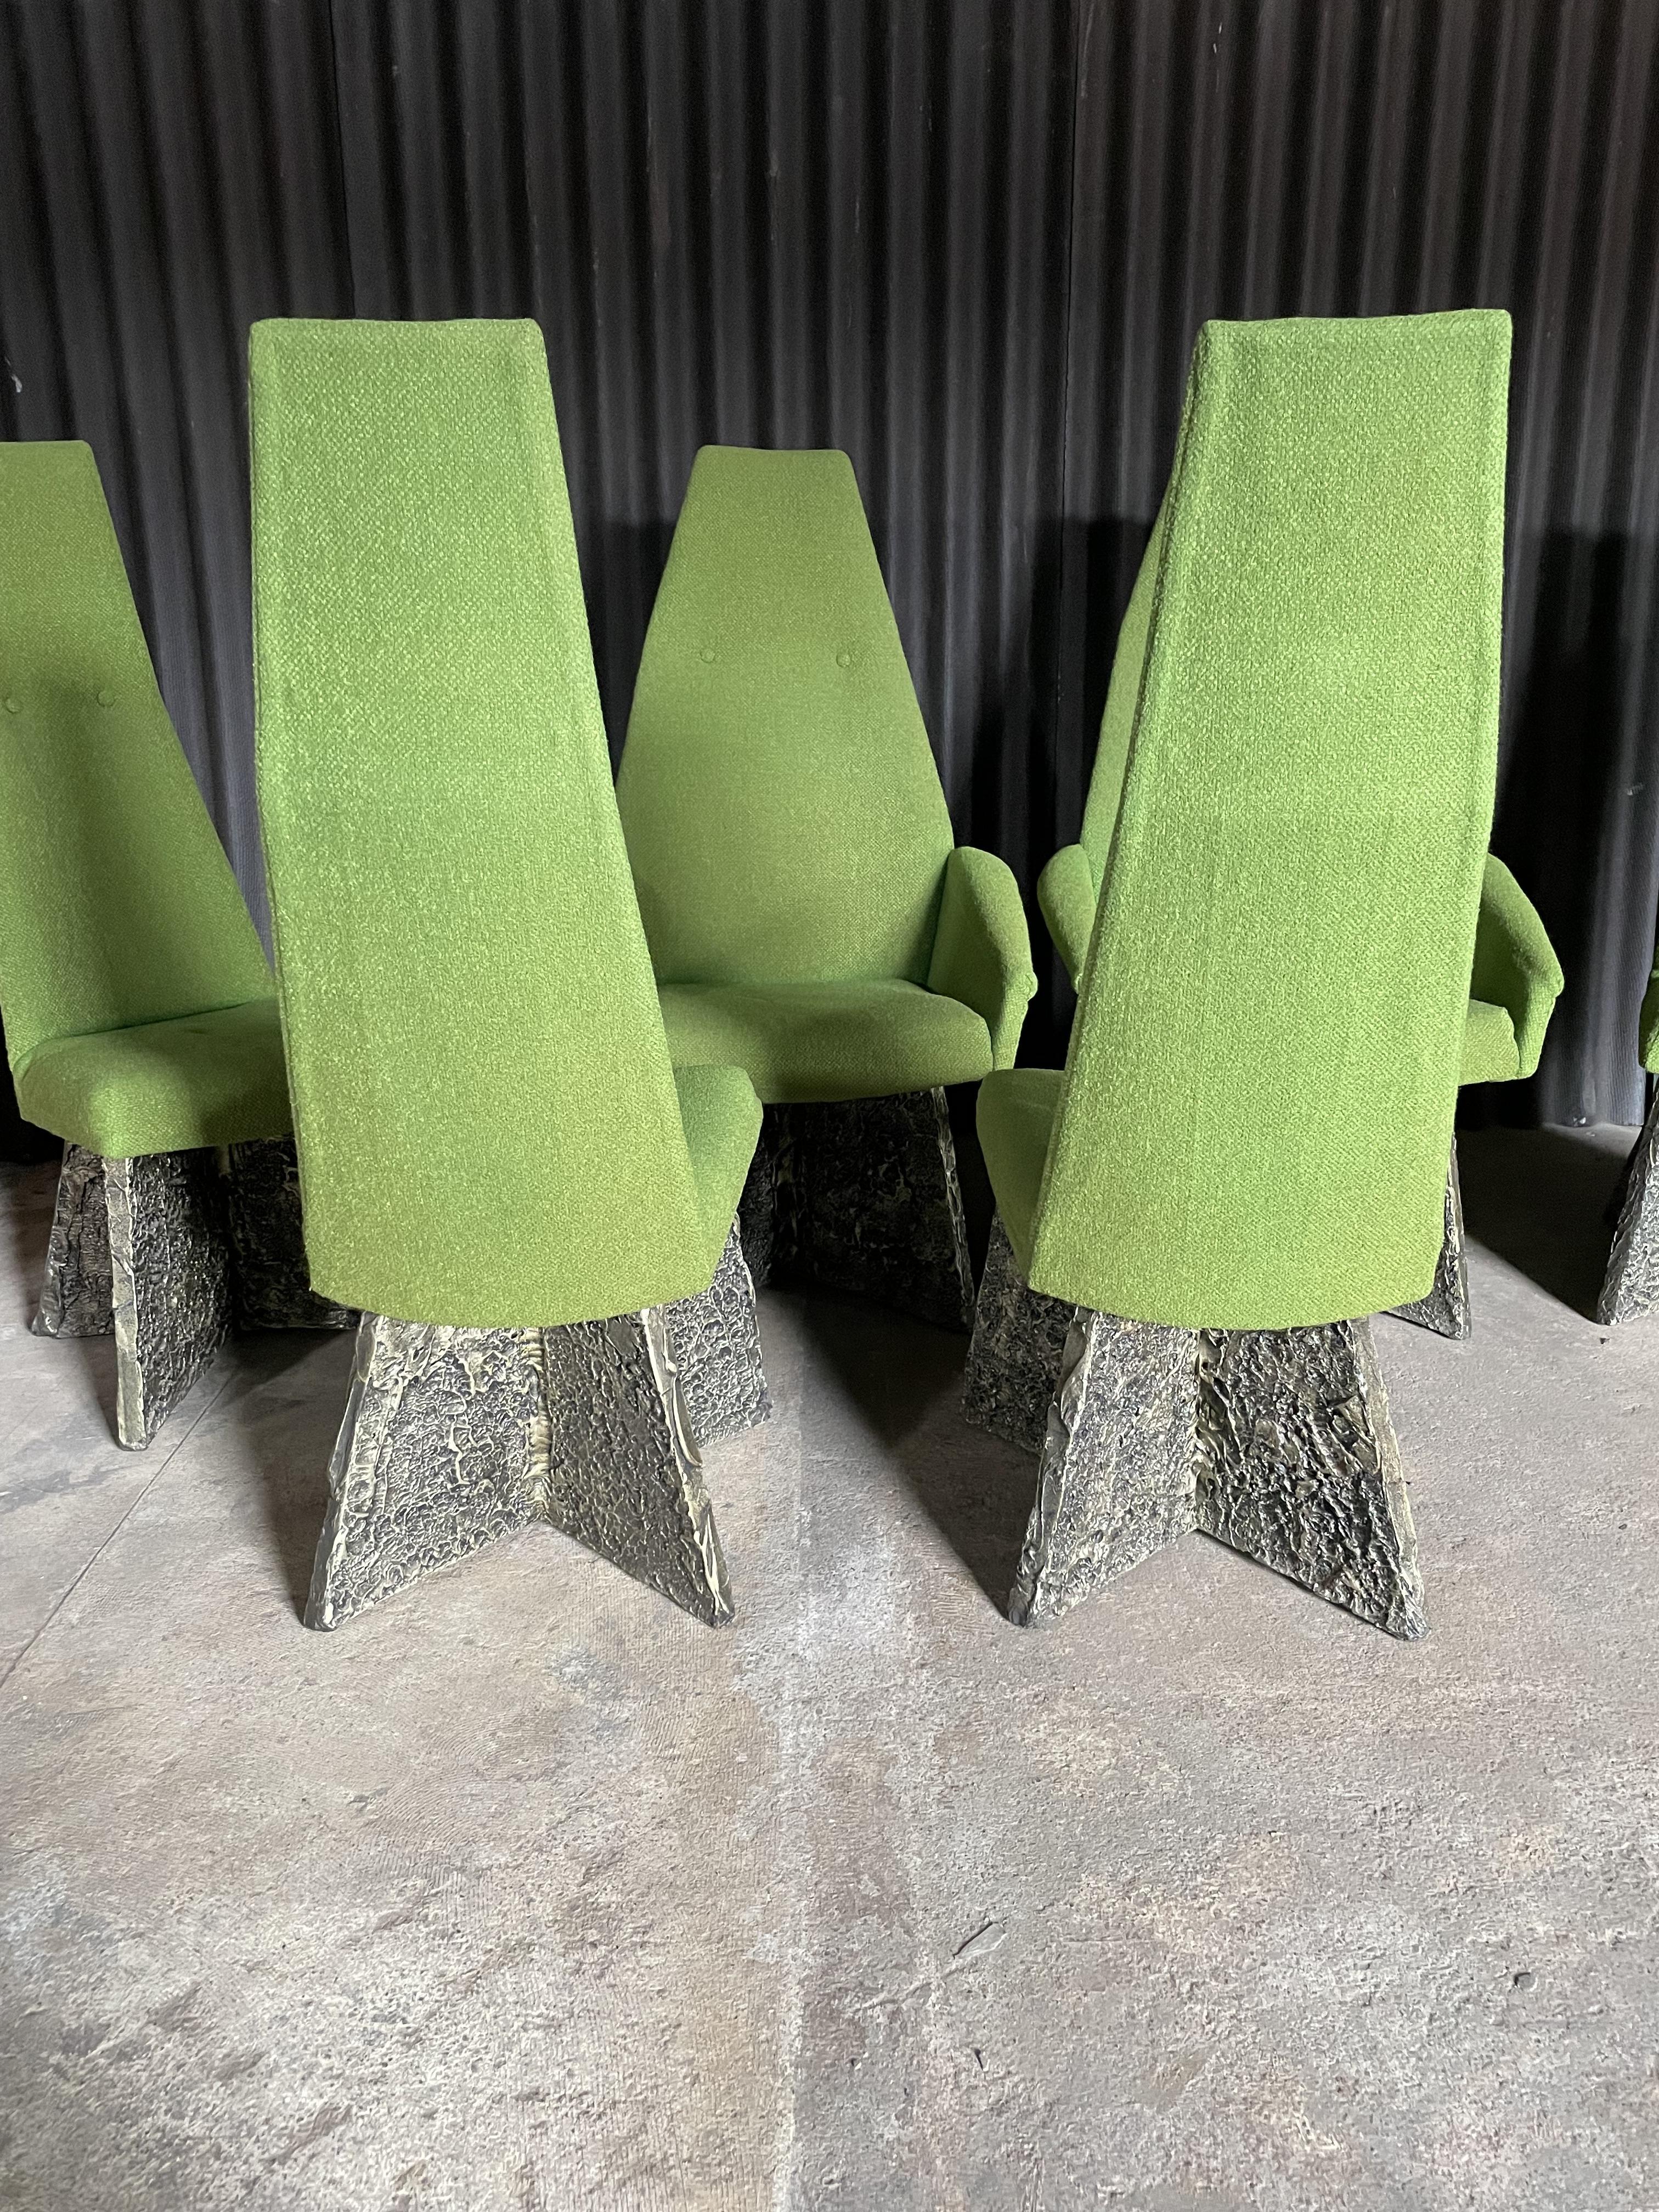 Resin Adrian Pearsall Set of 6 Brutalist Dining Chairs For Sale